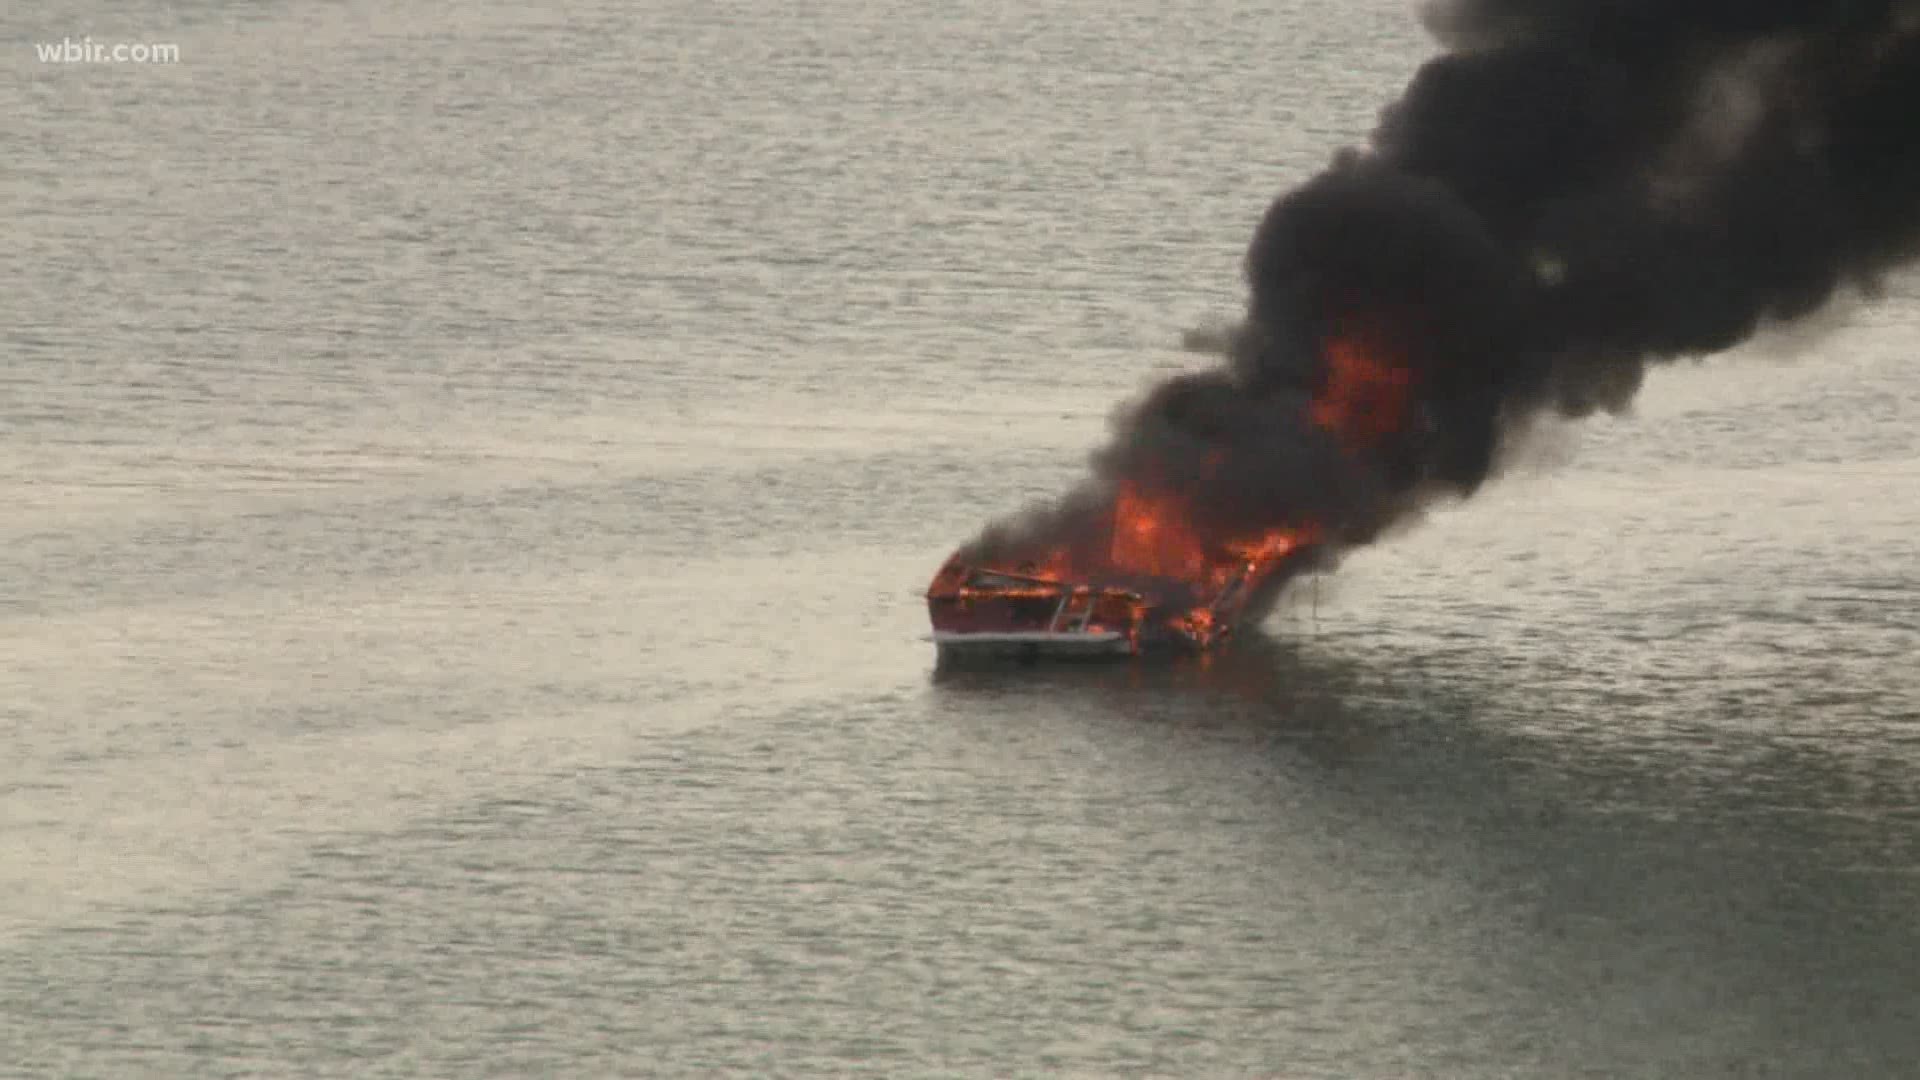 THE KNOXVILLE FIRE DEPARTMENT SAID TWO PEOPLE WERE ON BOARD THE BOAT WHEN THE FIRE STARTED.